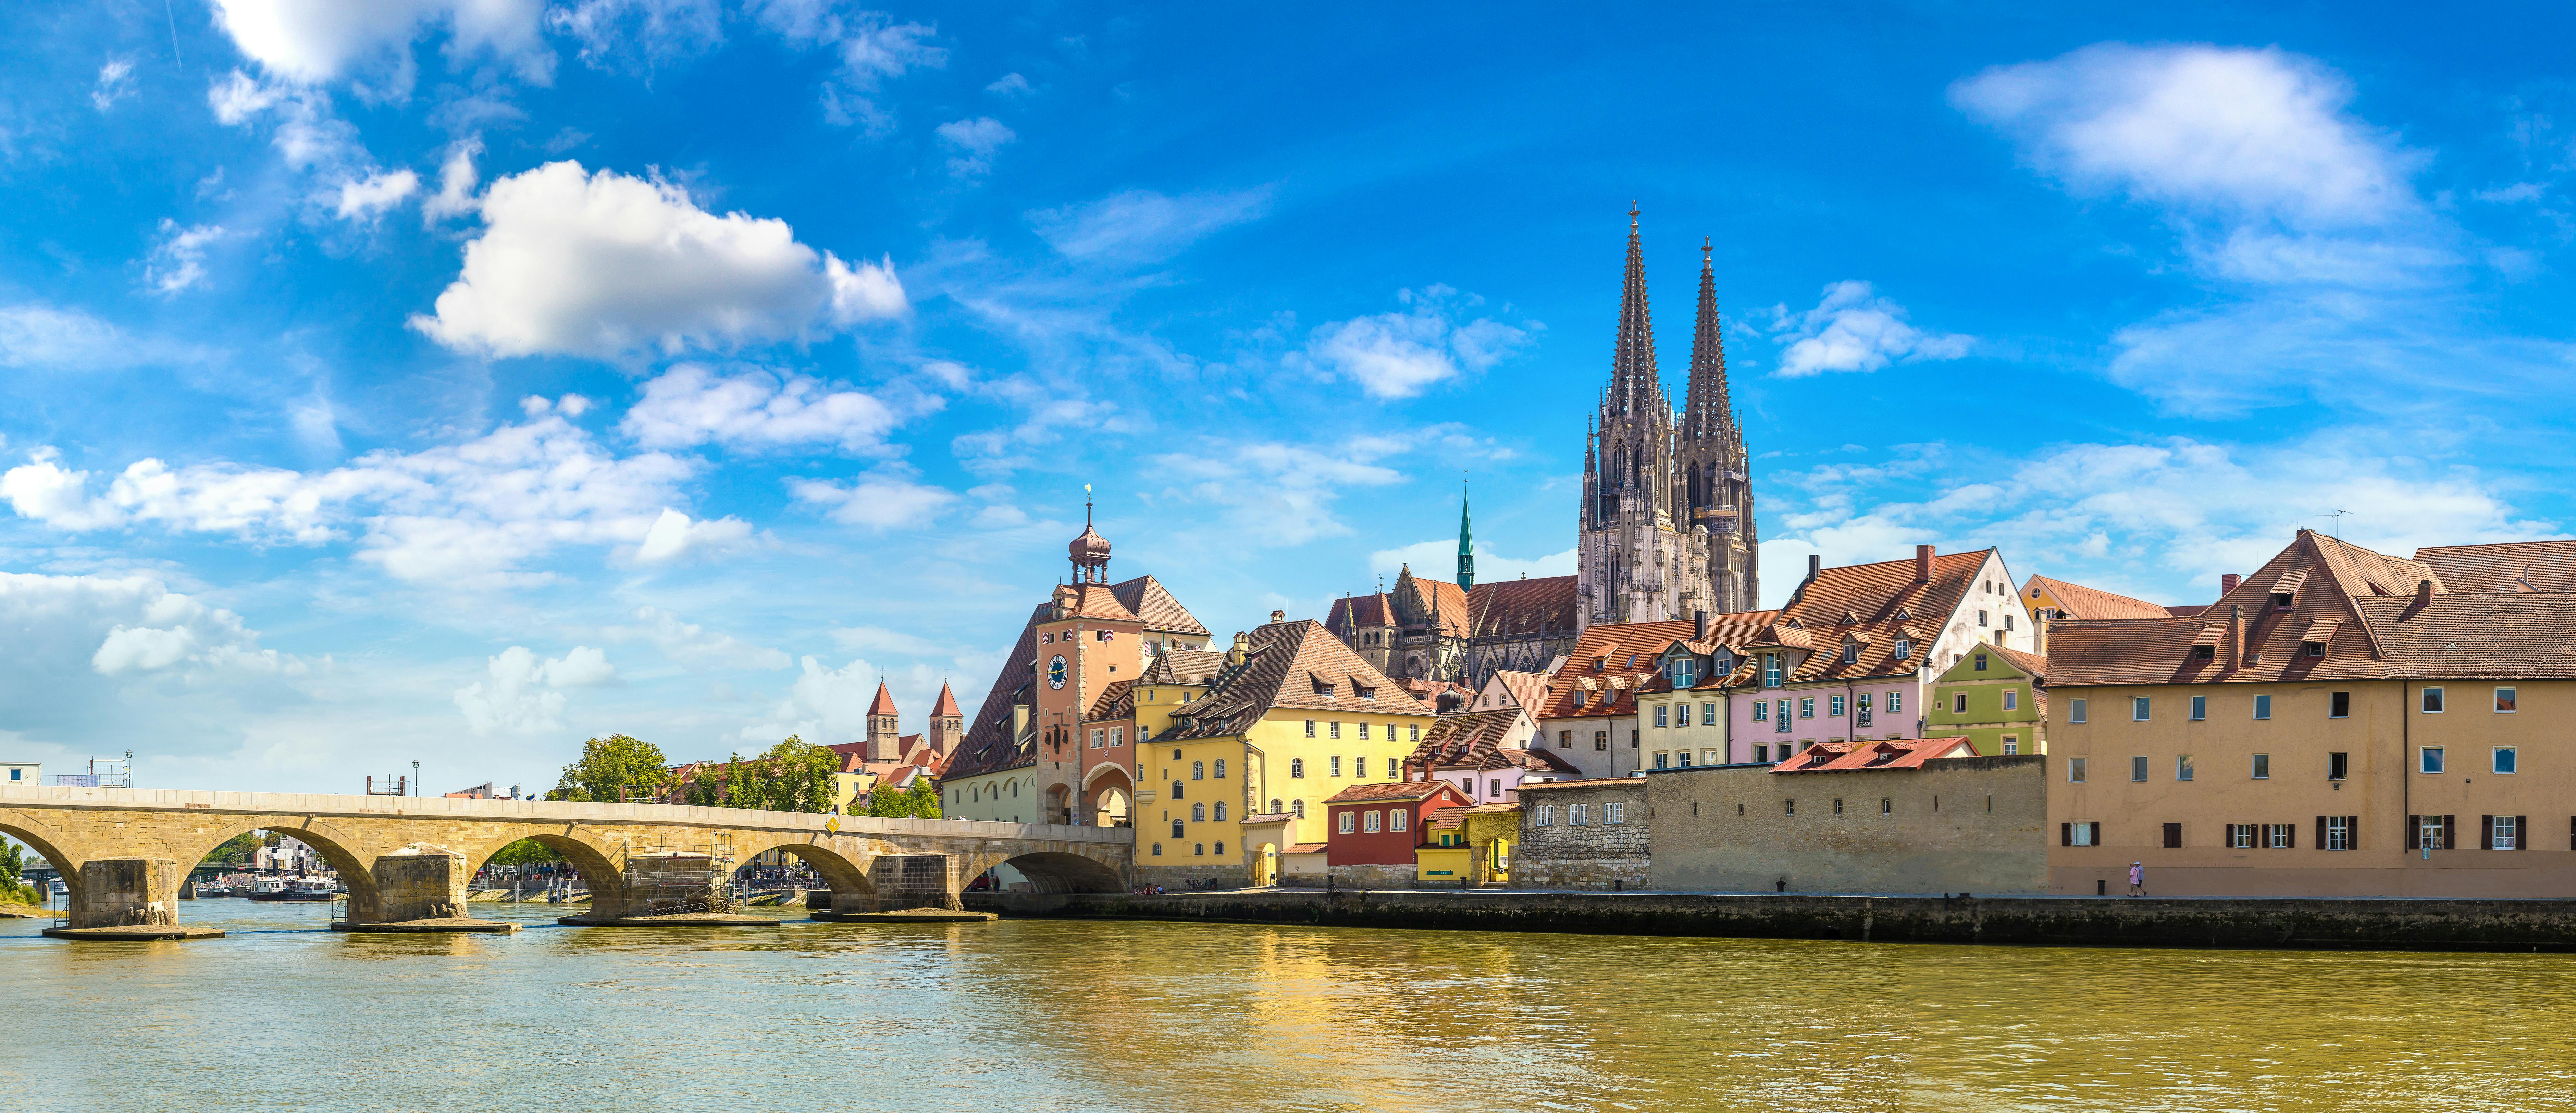 River Cruises Collection: Walking Tour of Regensburg